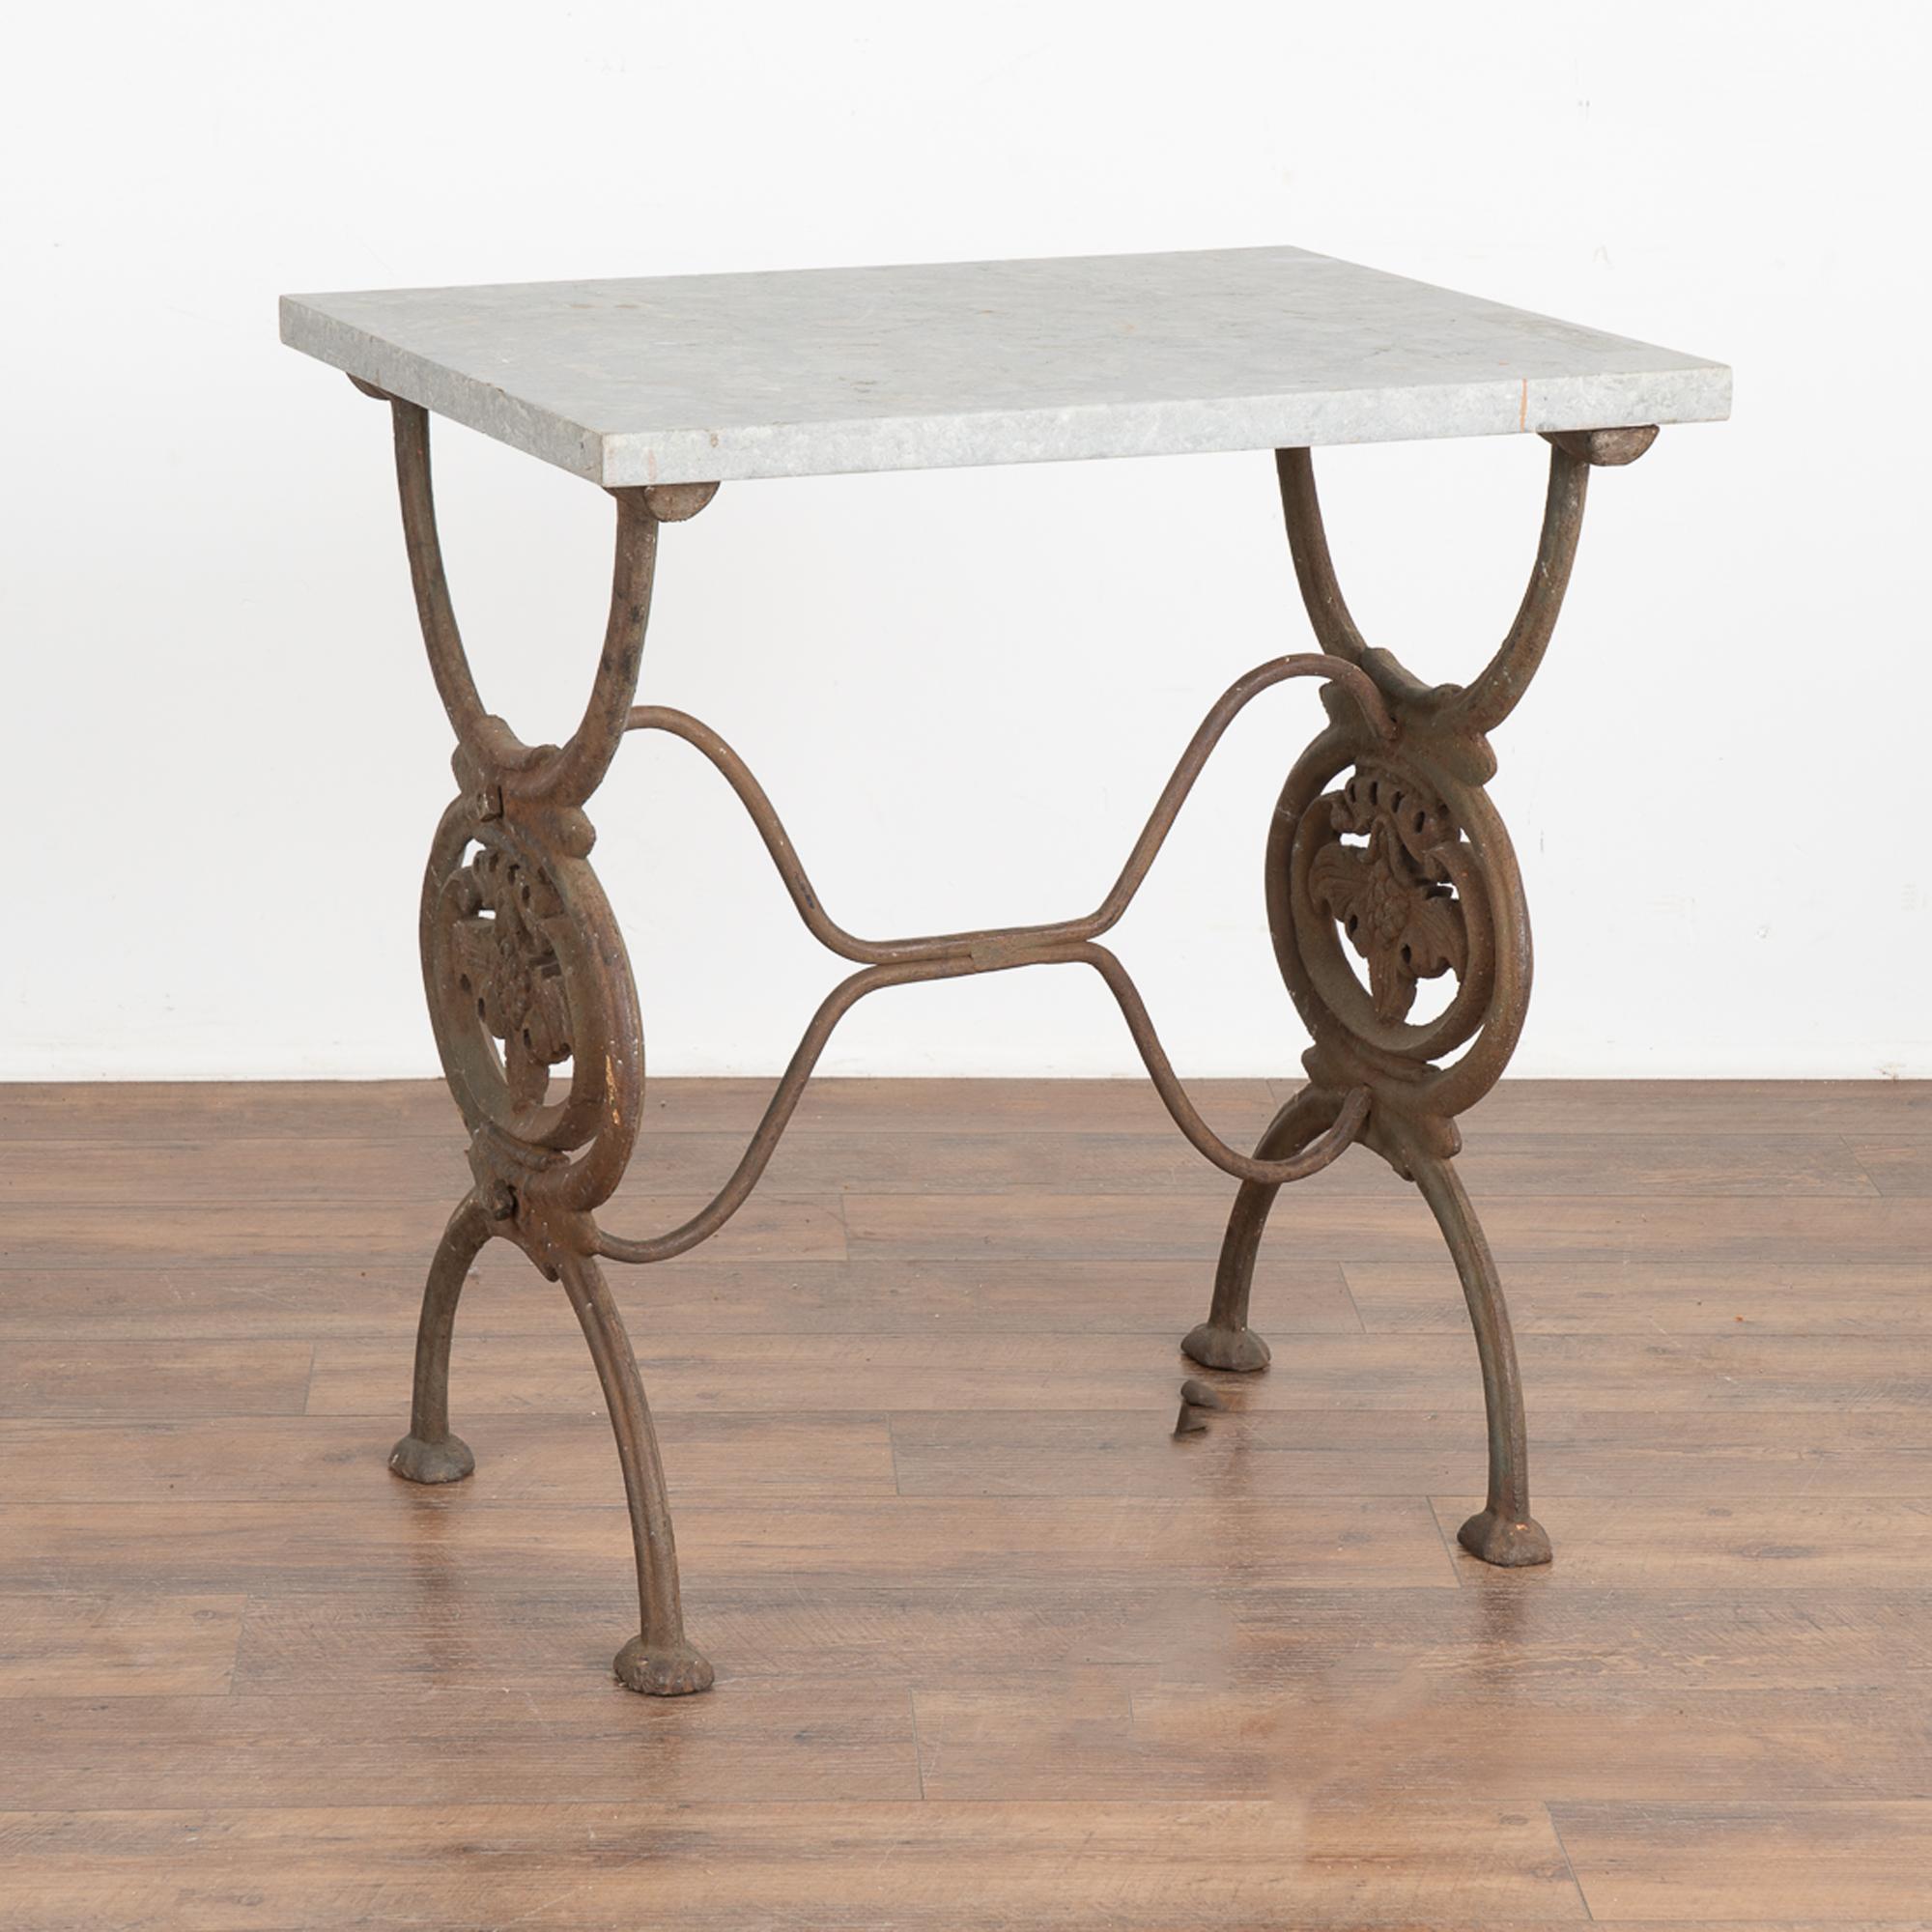 Stone top iron side table, perfect for outdoor space or unique interior accent table. Please enlarge photos to appreciate the beauty of the stone top. 
Strong, stable, ready to place and enjoy. Any cracks, discoloration, signs of wear are a